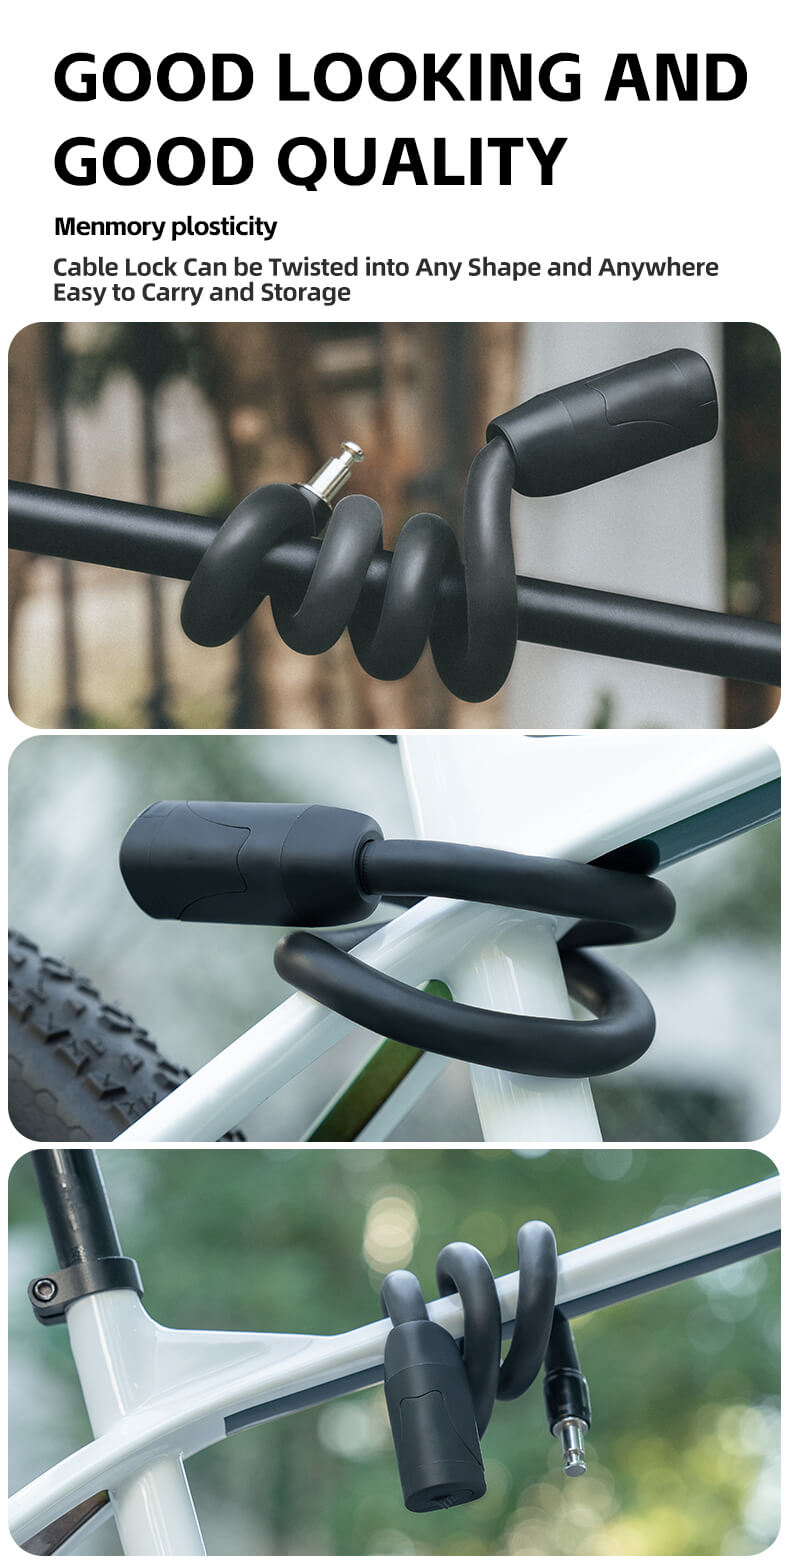 Bike Lock Cable Memory Anti Theft Bicycle Cable Lock Self Coiling Cable Lock with 2 Keys 